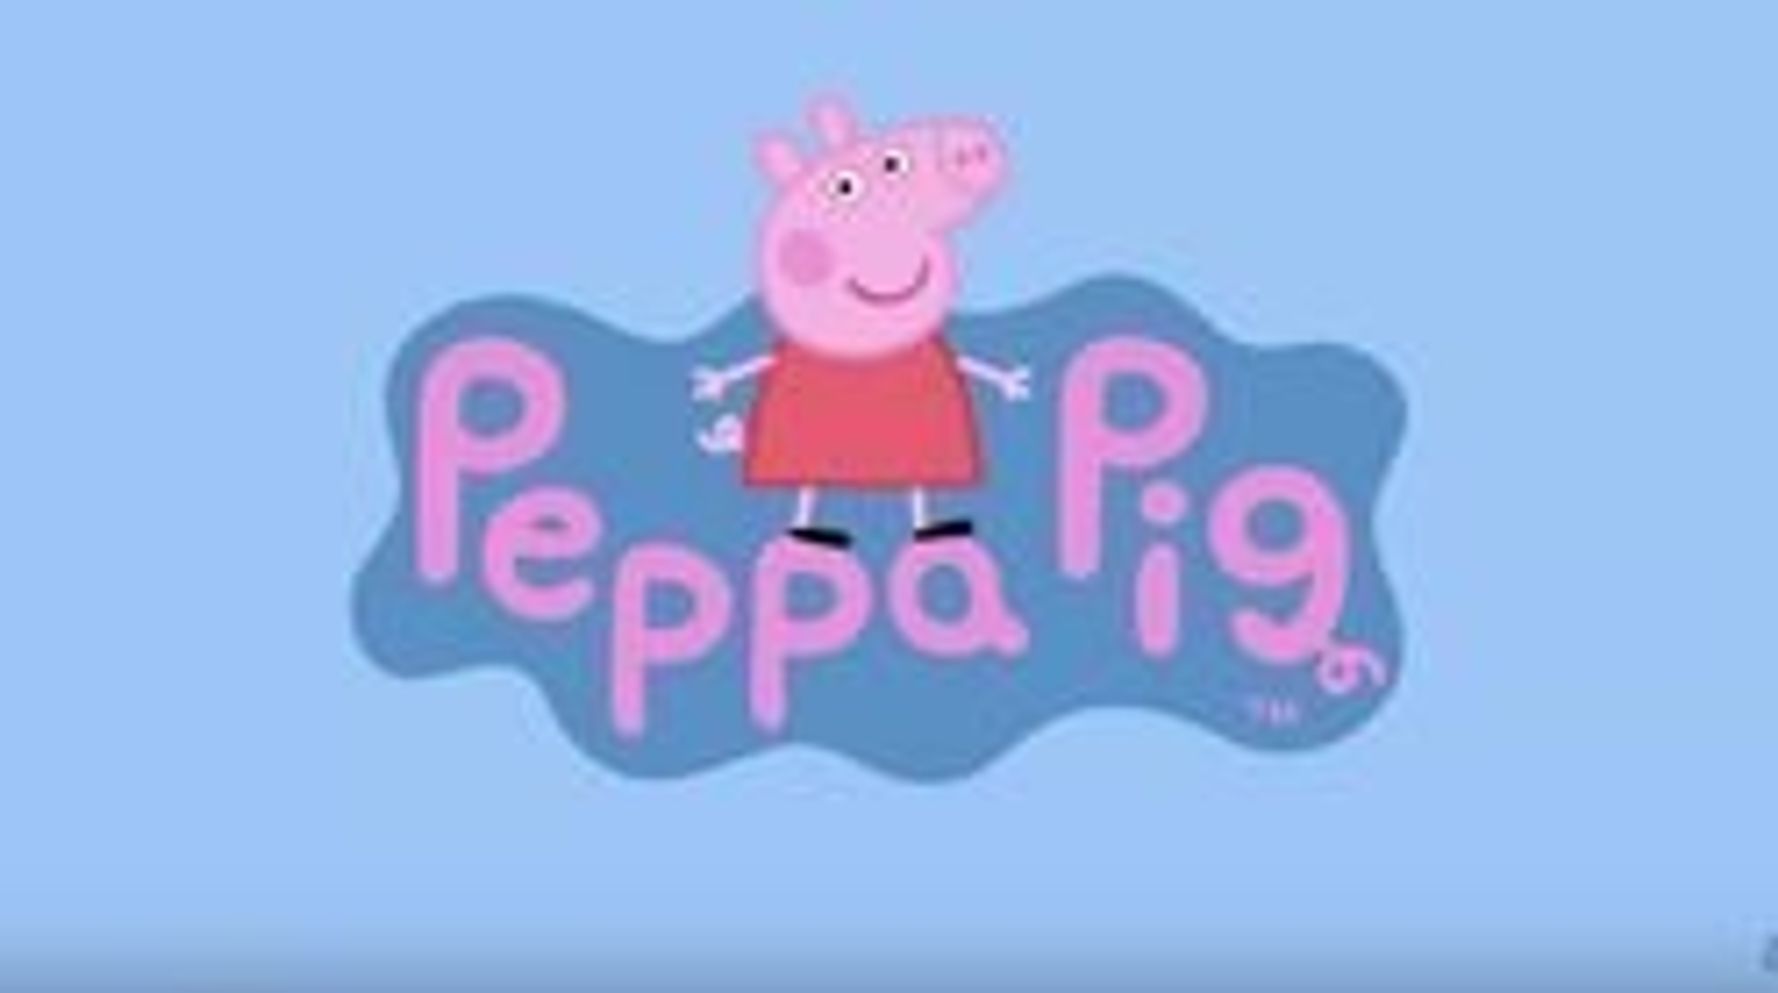 What Is Peppa Pig S Height The Answer Might Be A Surprise